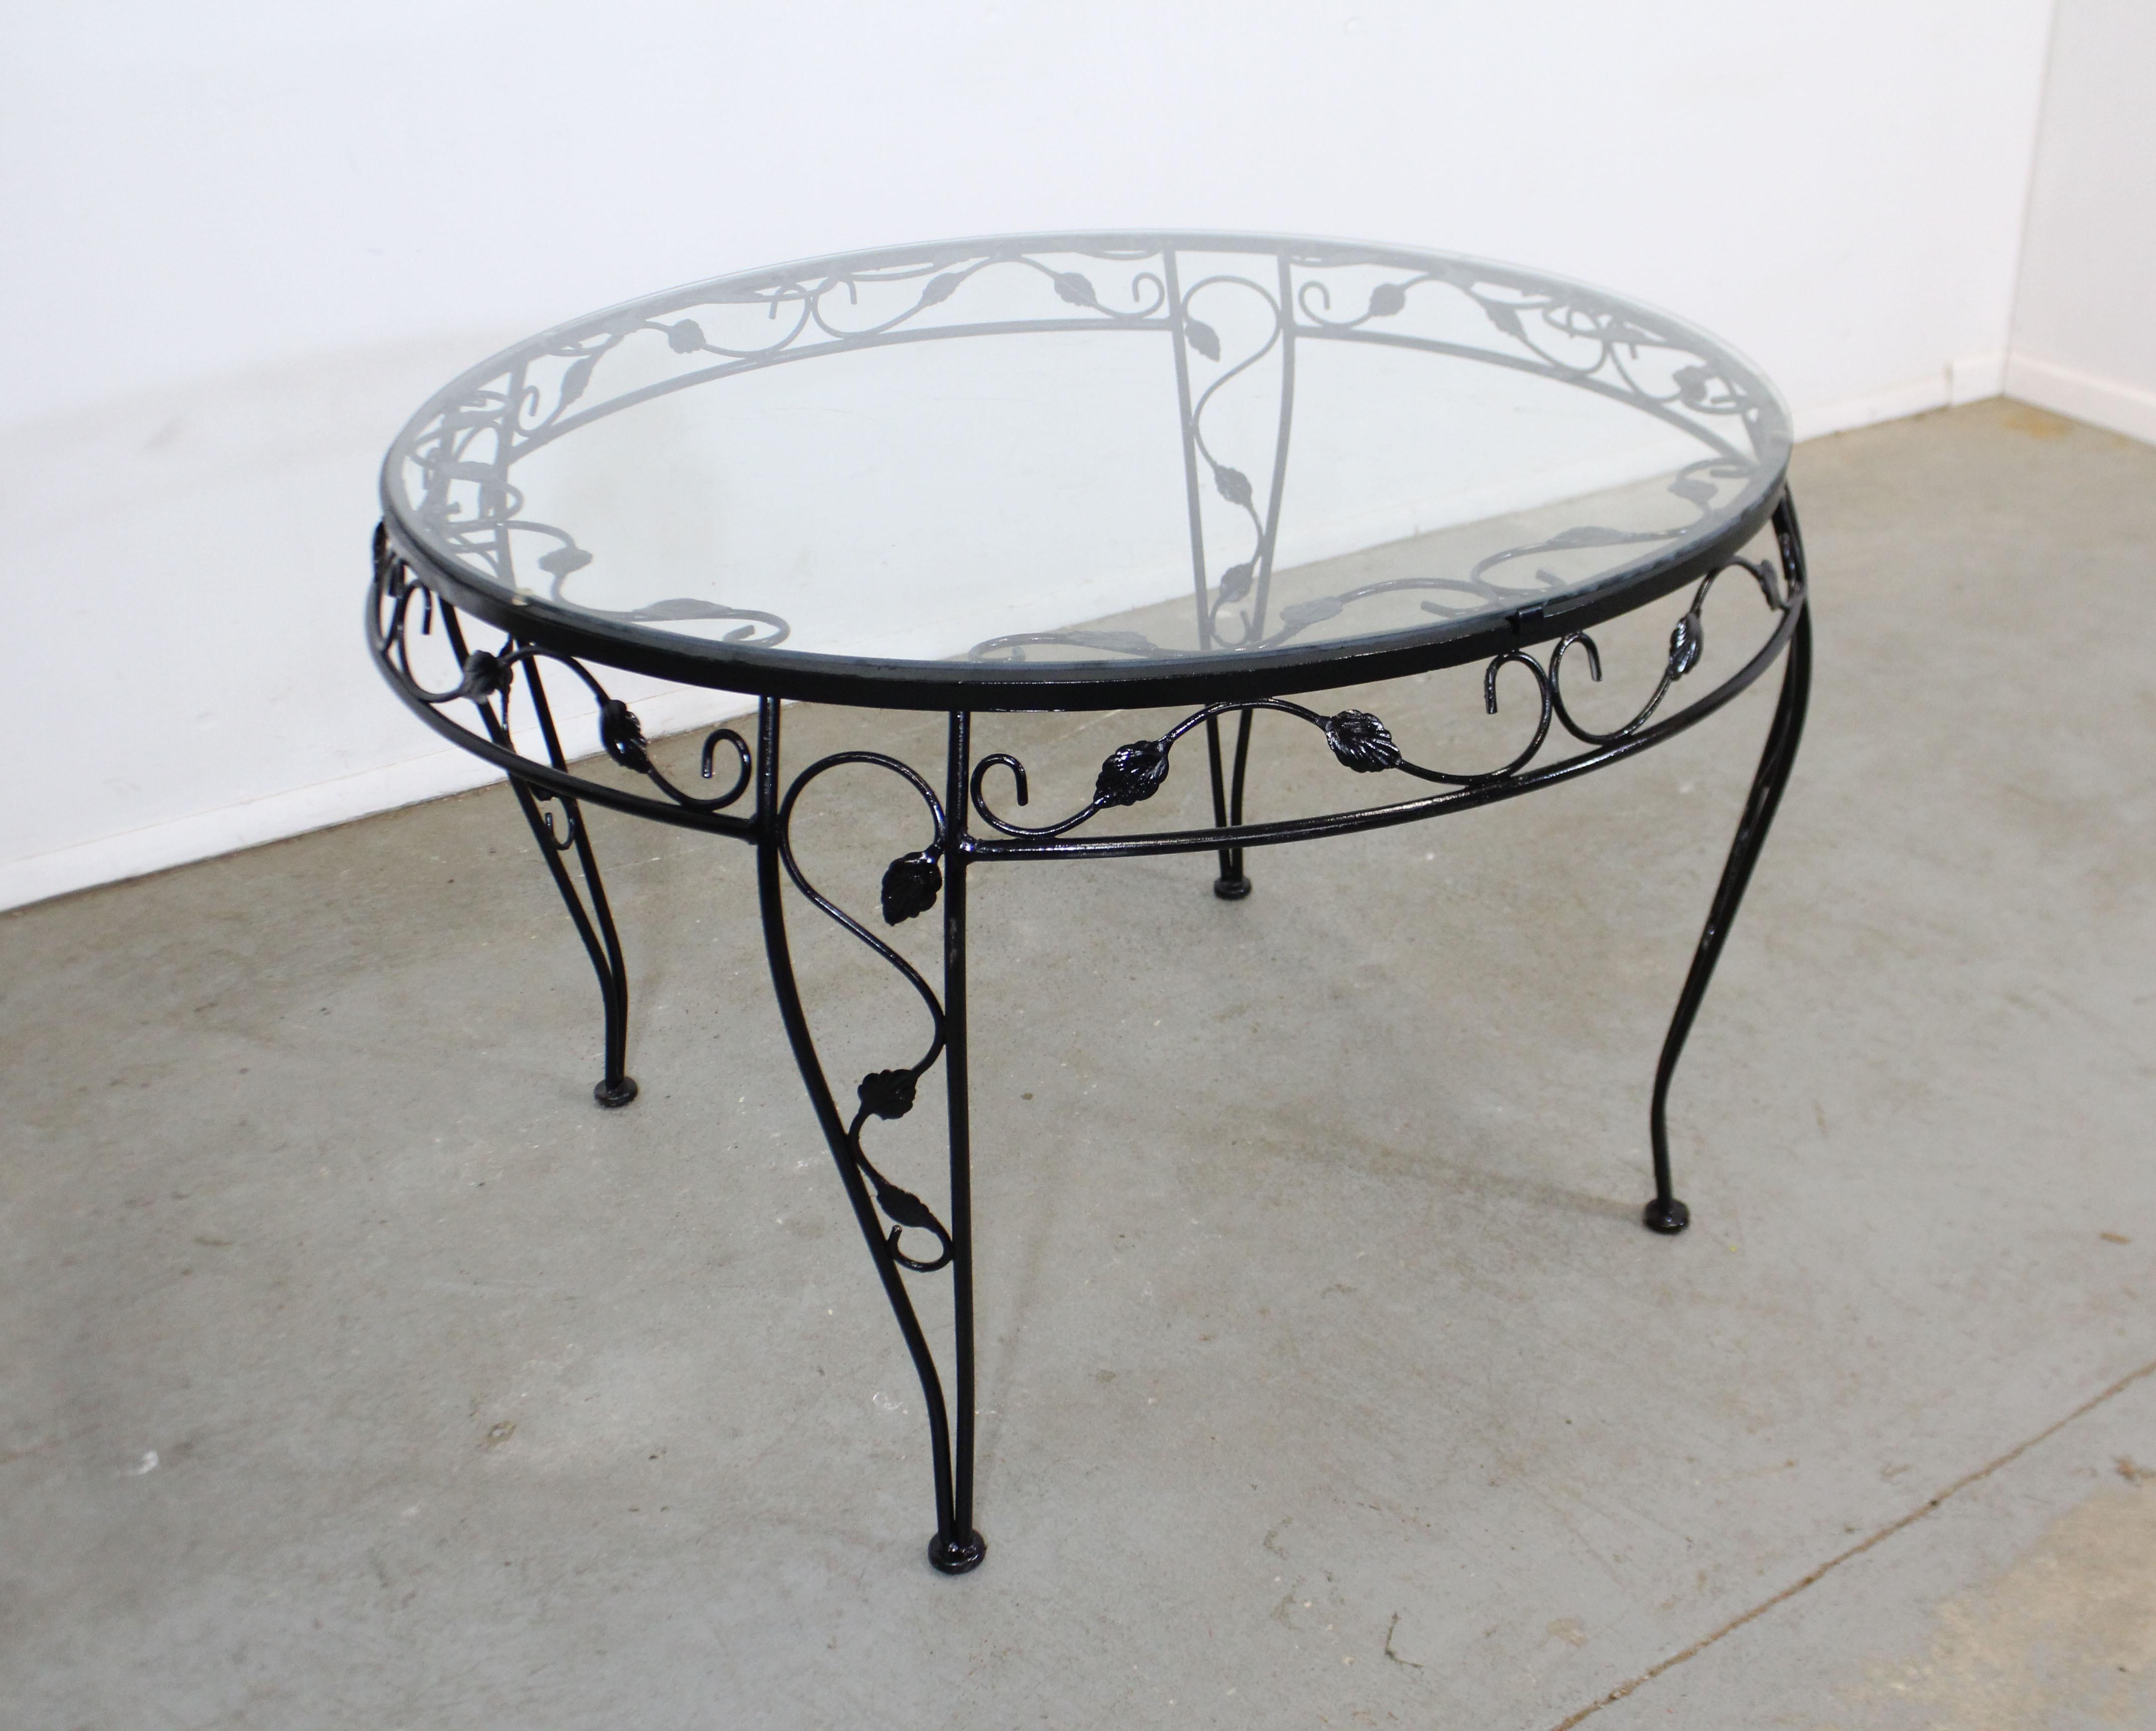 What a find. Offered is a vintage wrought iron dining table with a dogwood-leaf design and a removable glass top. Perfect for an outdoor patio space! I believe was made for Meadowcraft's 'Dogwood' line. It is in good condition with a repainted and